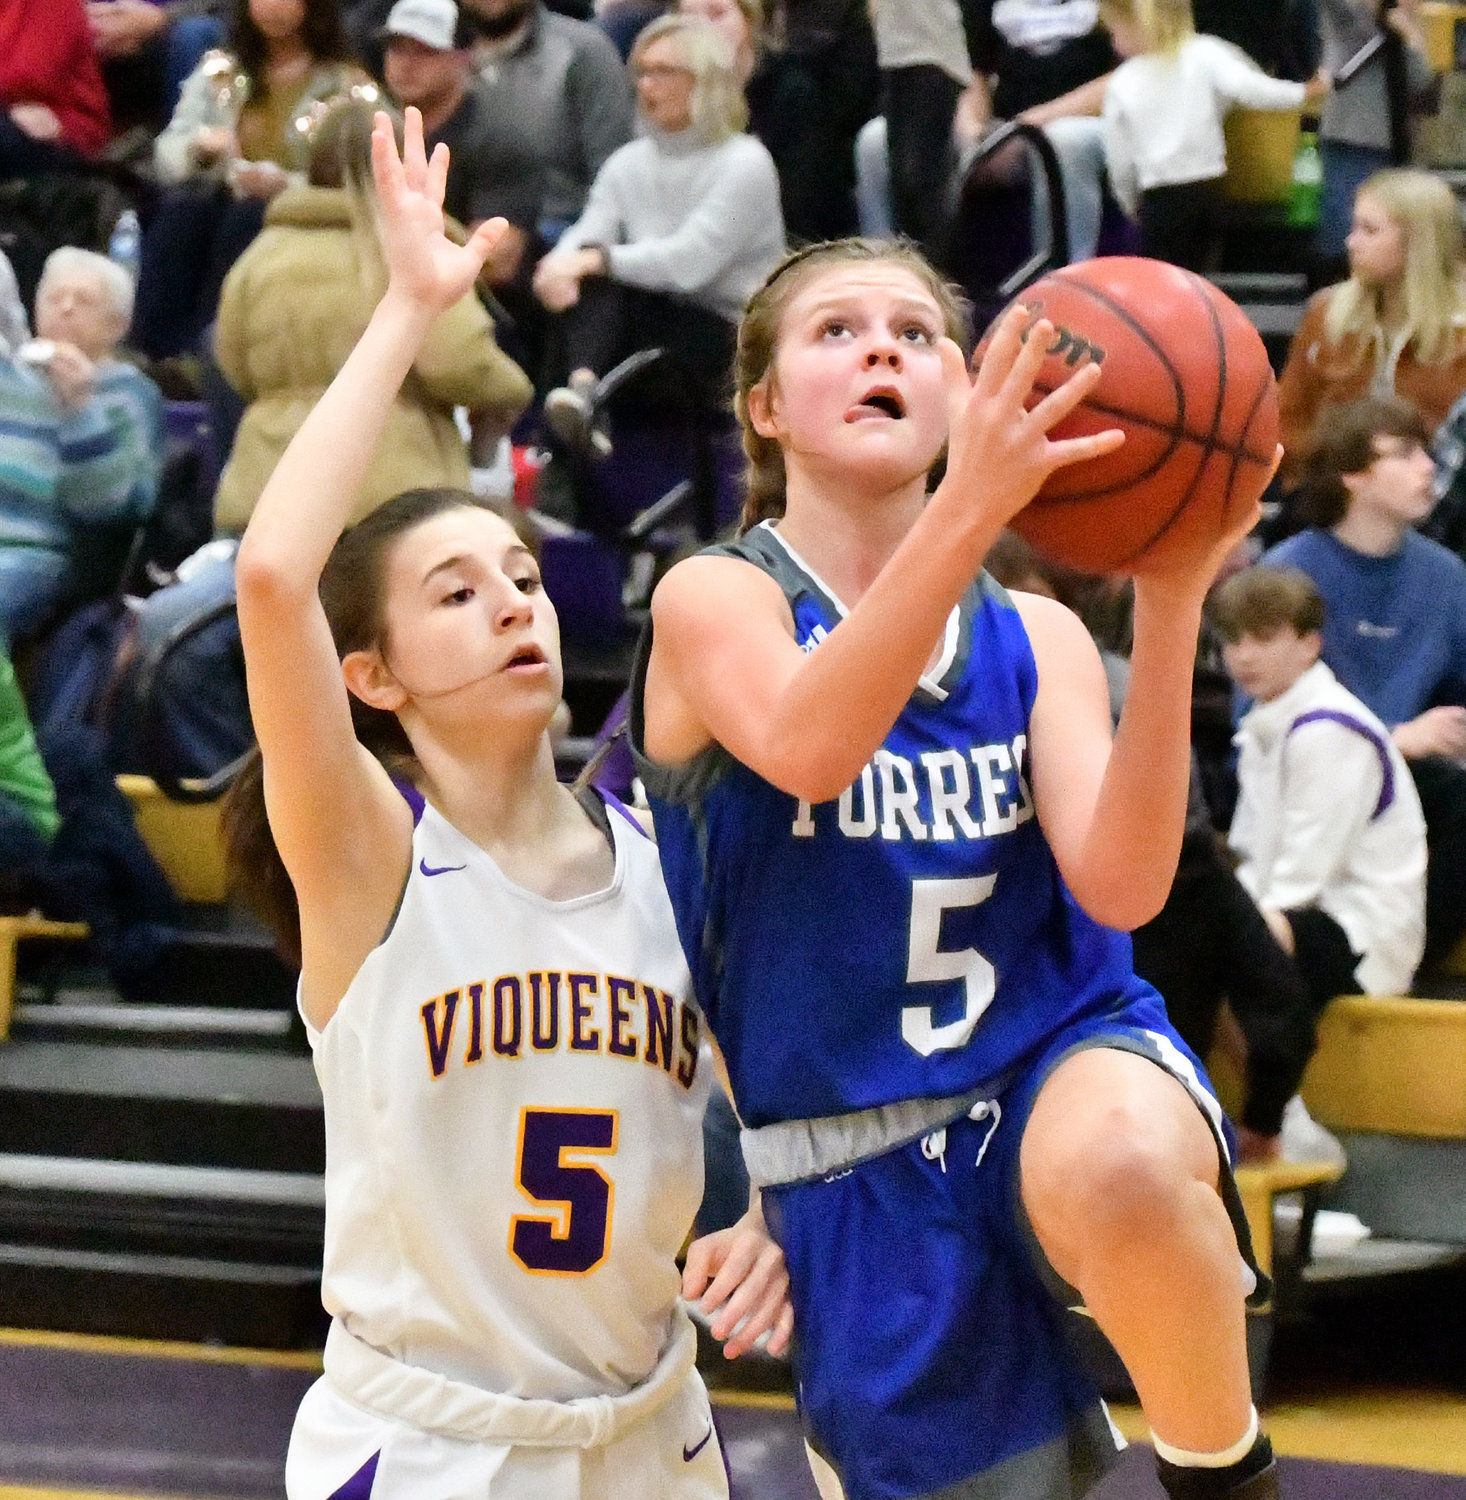 Macyn Kirby (5) drives to the basket for the Lady Rockets.  Kirby led Forrest with 20 points.